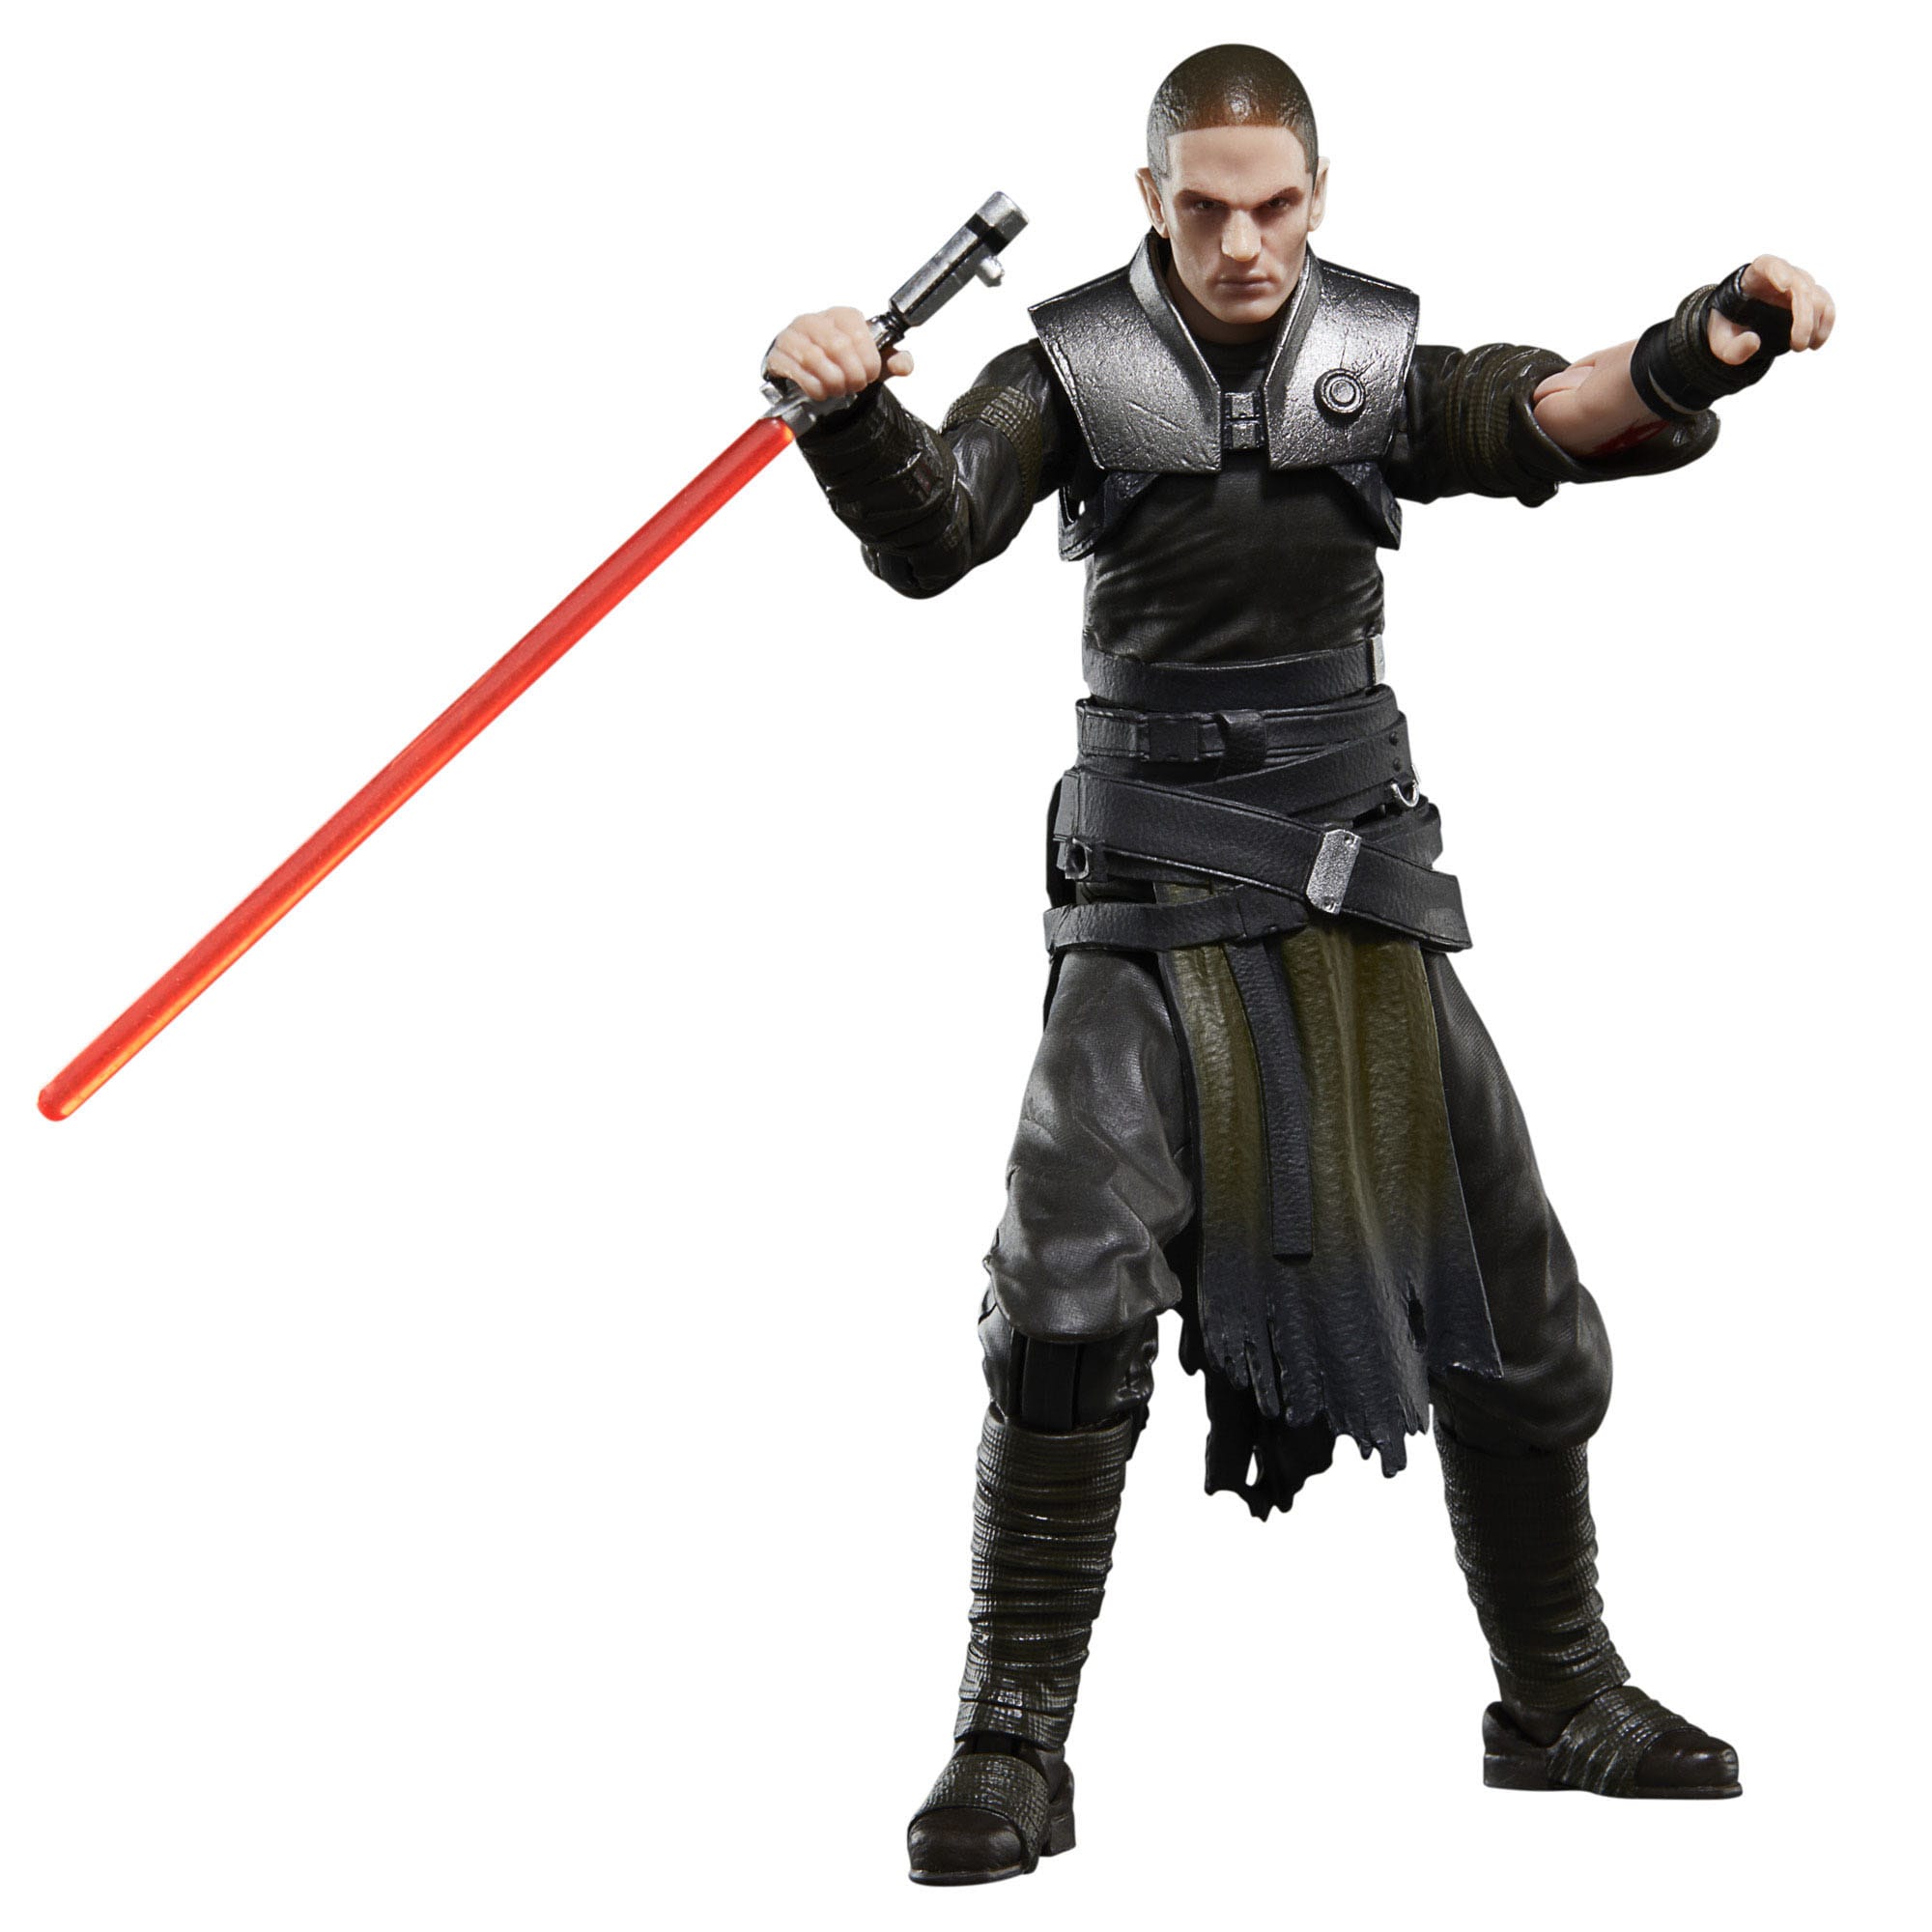 Star Wars: The Force Unleashed Black Series Gaming Greats Actionfigur Starkiller 15 cm HASF7034 5010996142061